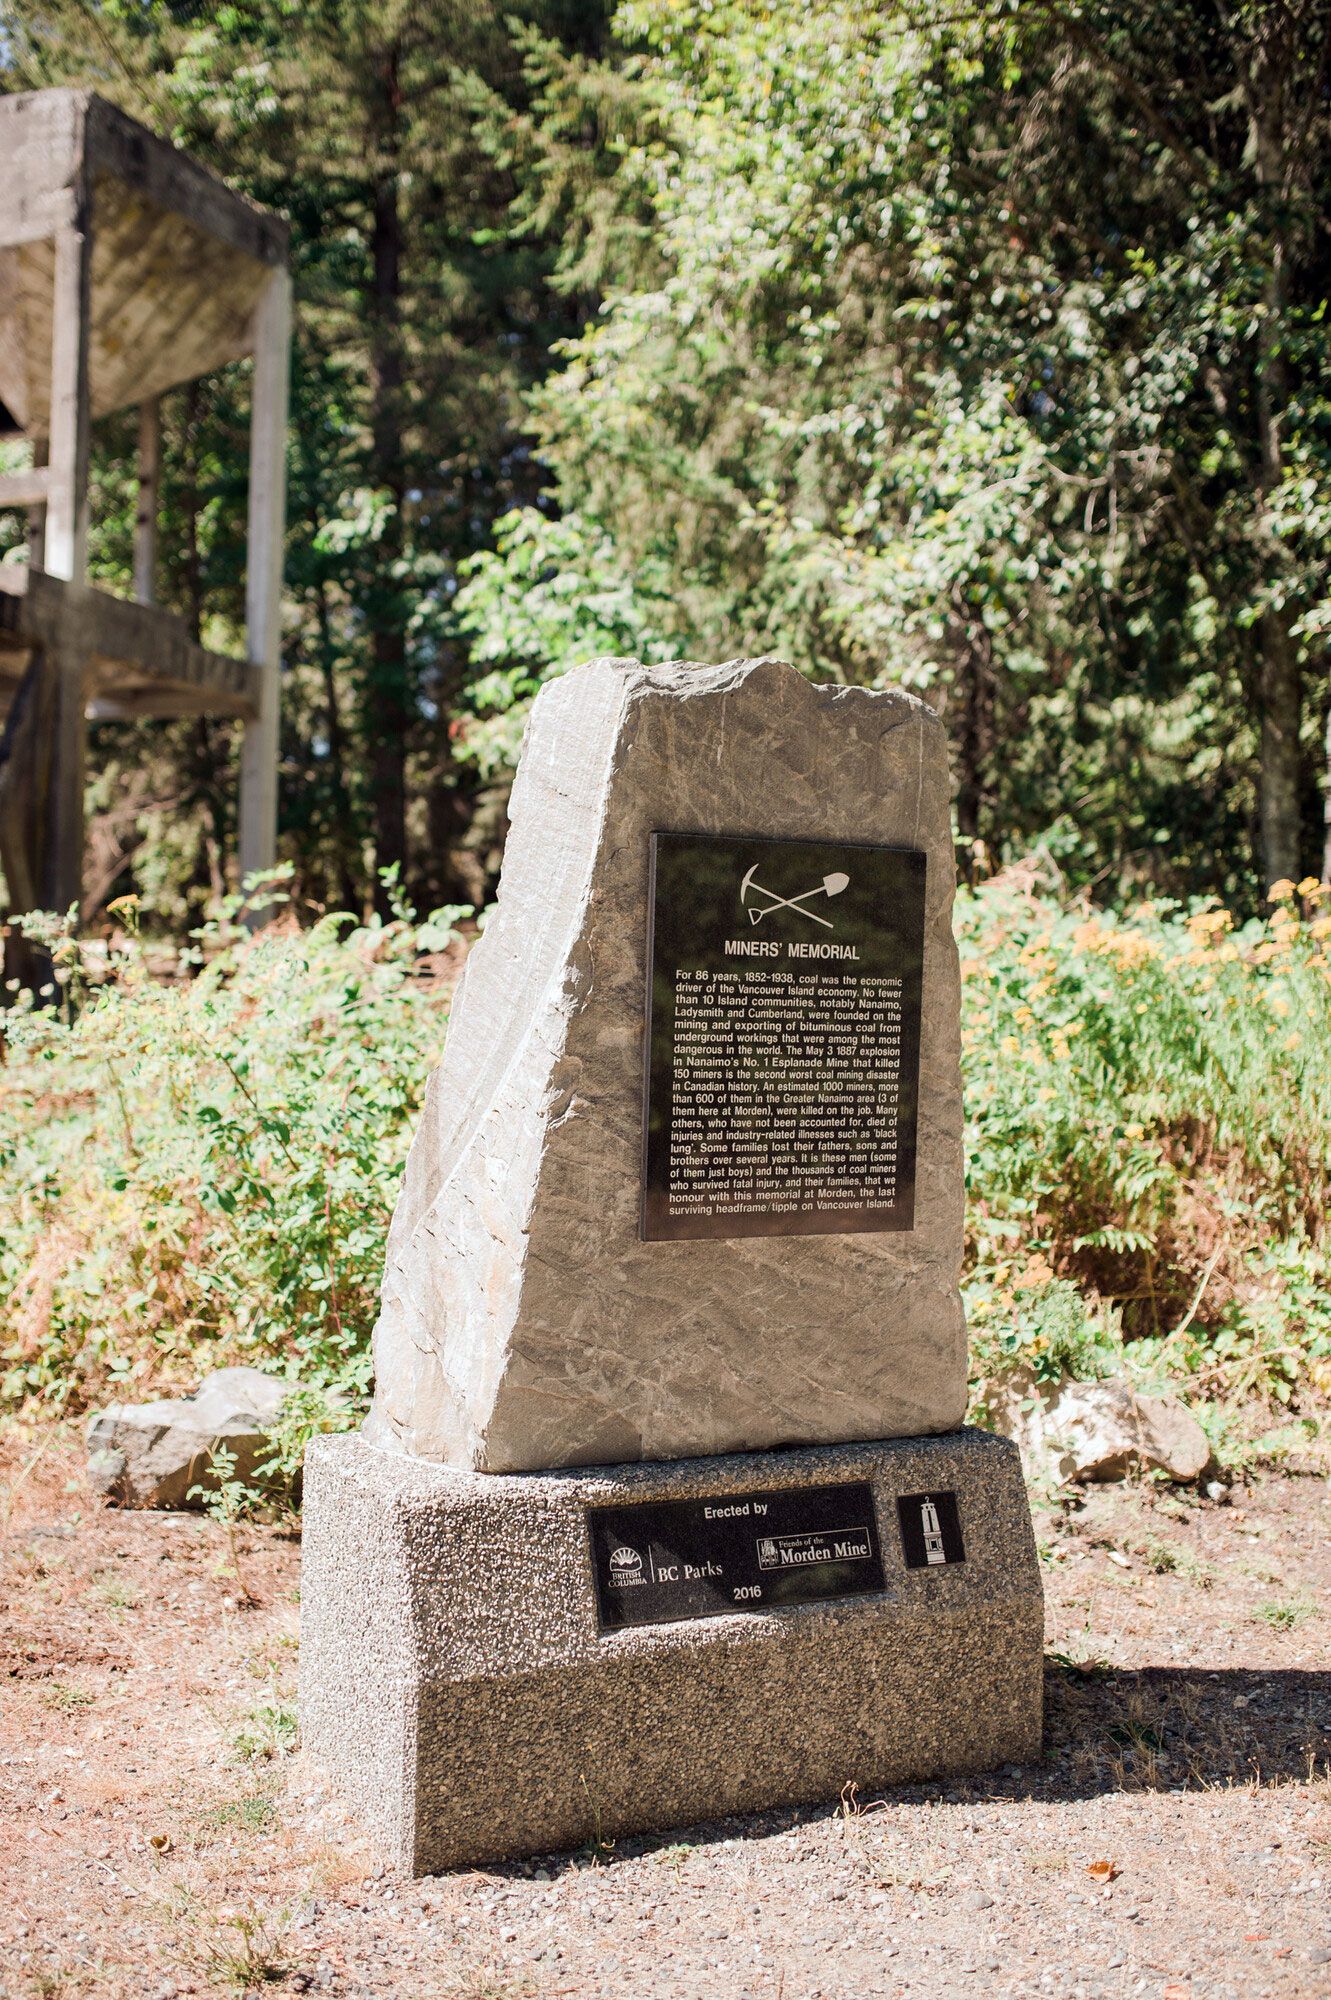 In Morden Colliery Historic Park, is a monument dedicated to the memory of those who worked in the coal mining industry on Vancouver Island.